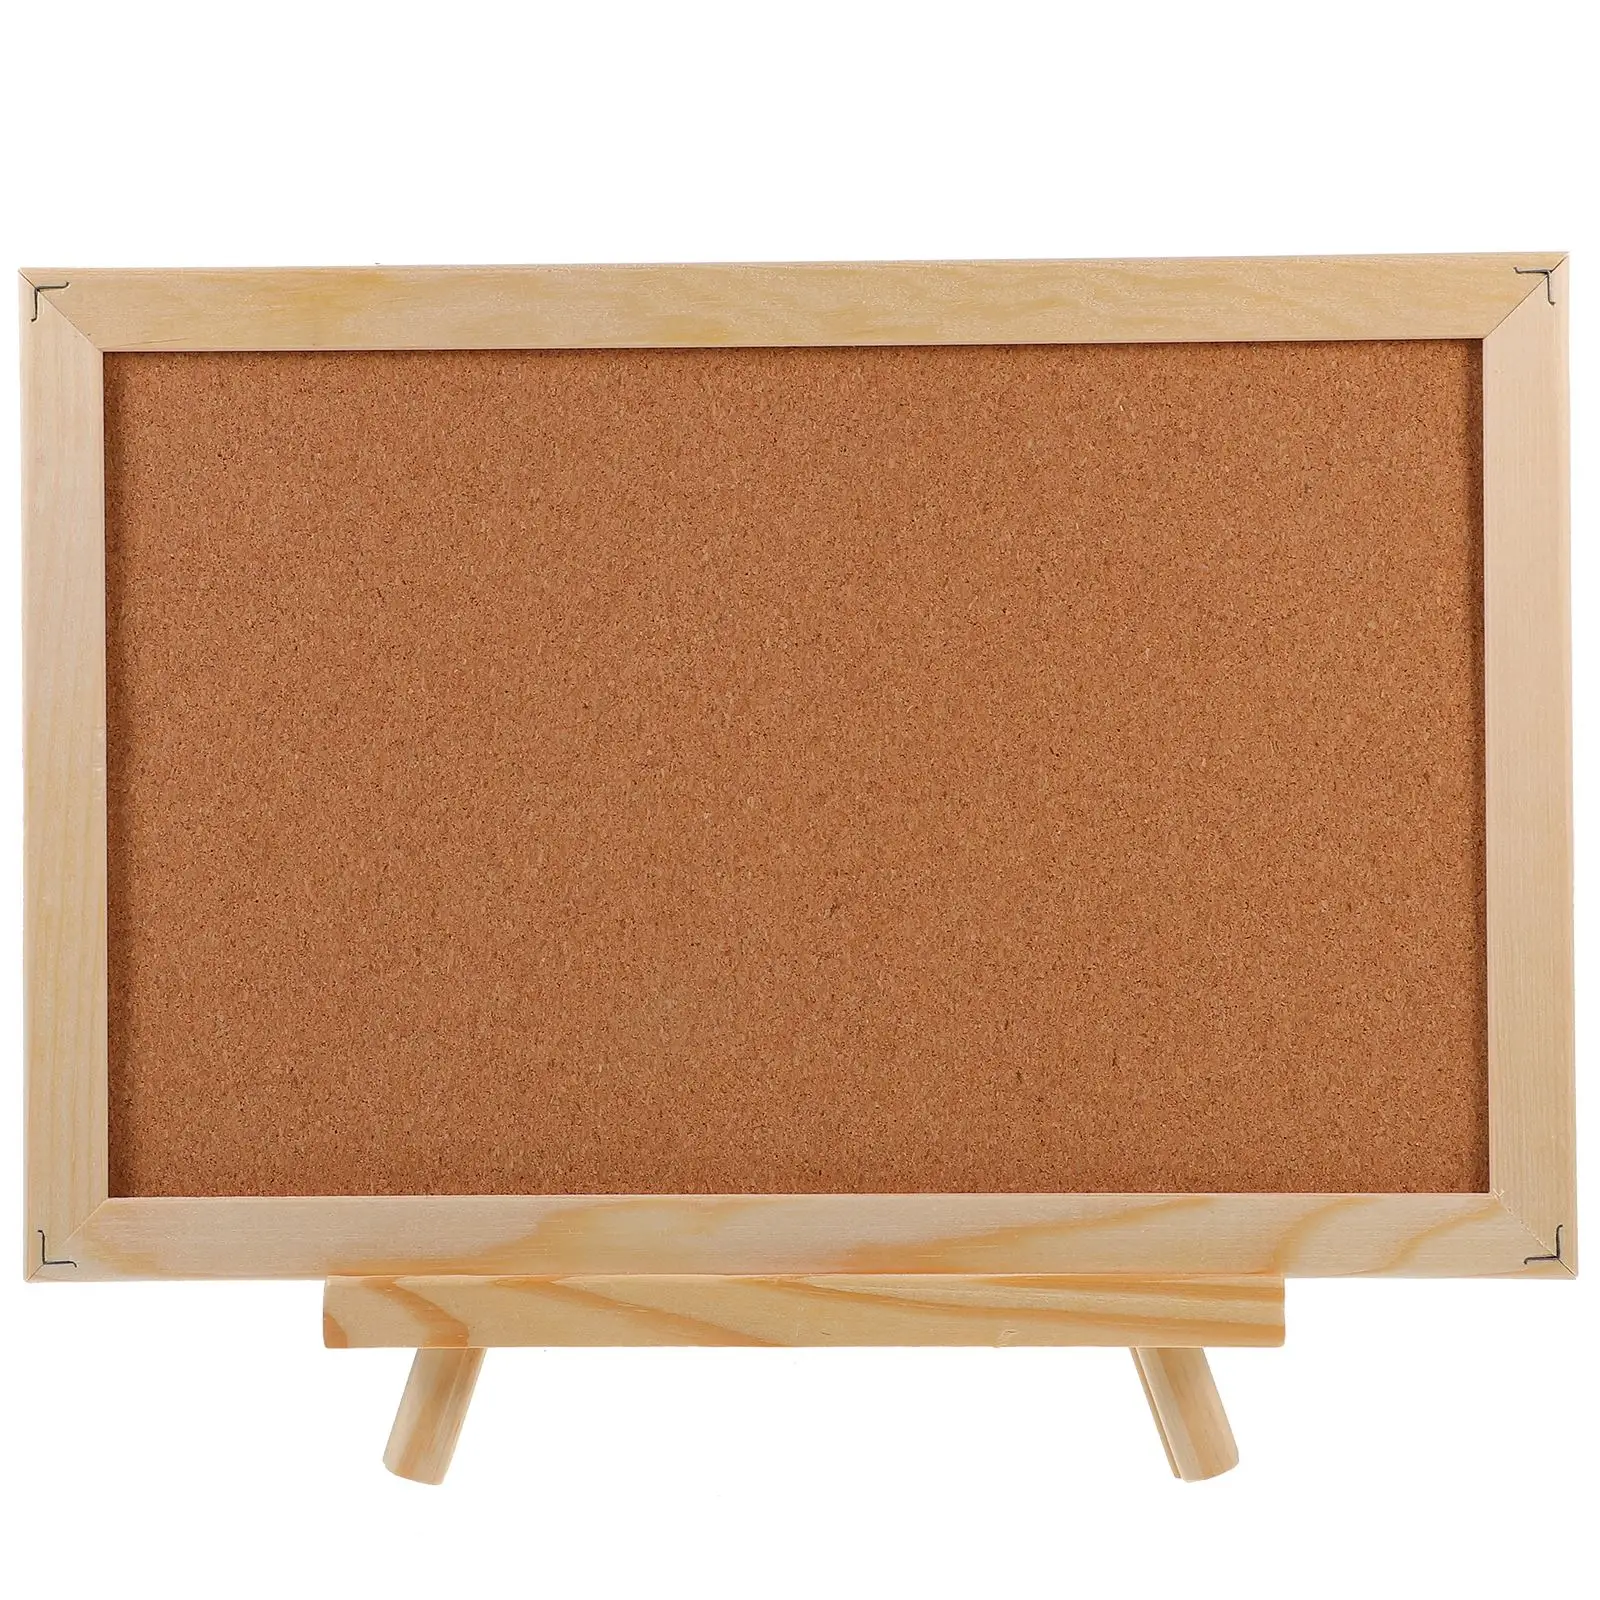 Durable Cork Wood Wall Hanging Message Bulletin Board Frame Notice Note Memo Board For Home Office Shop School Photo Background felt wall sticker message board schedule file photo display board office home storage wall sticker background decor with pushpin